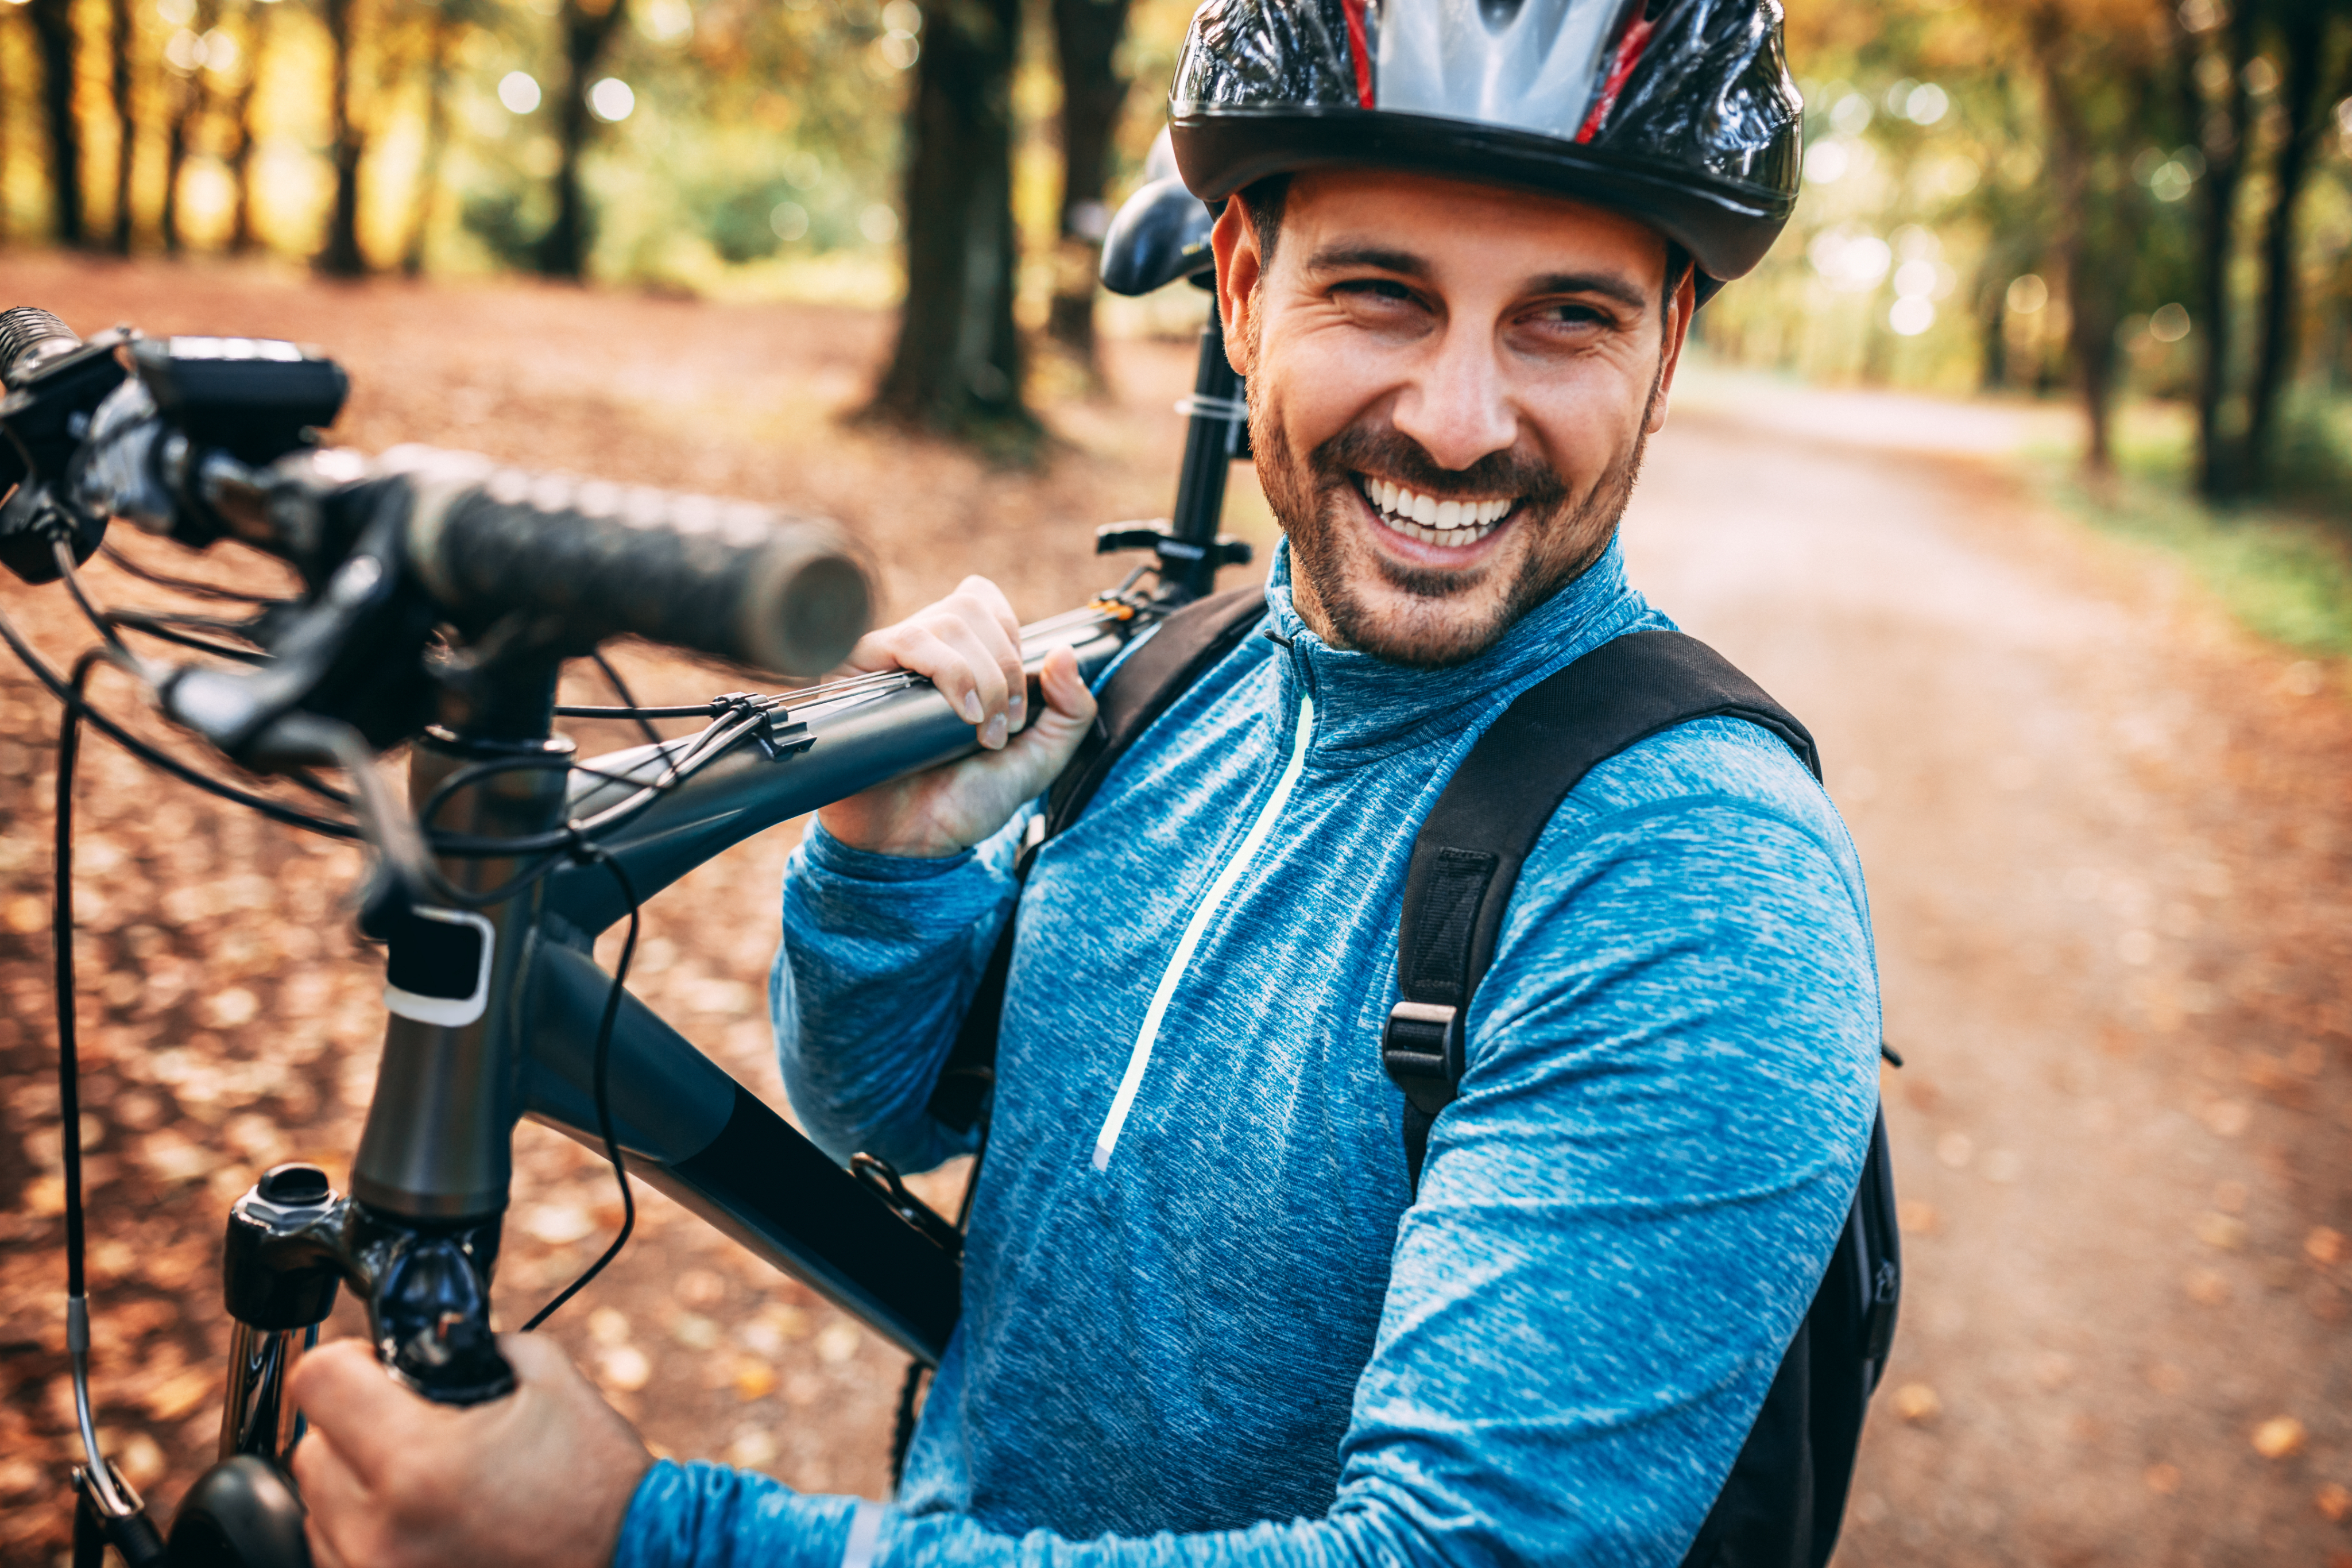 Guy wearing bicycle gear and helmet holding his mountain bike up on his shoulders while smiling.